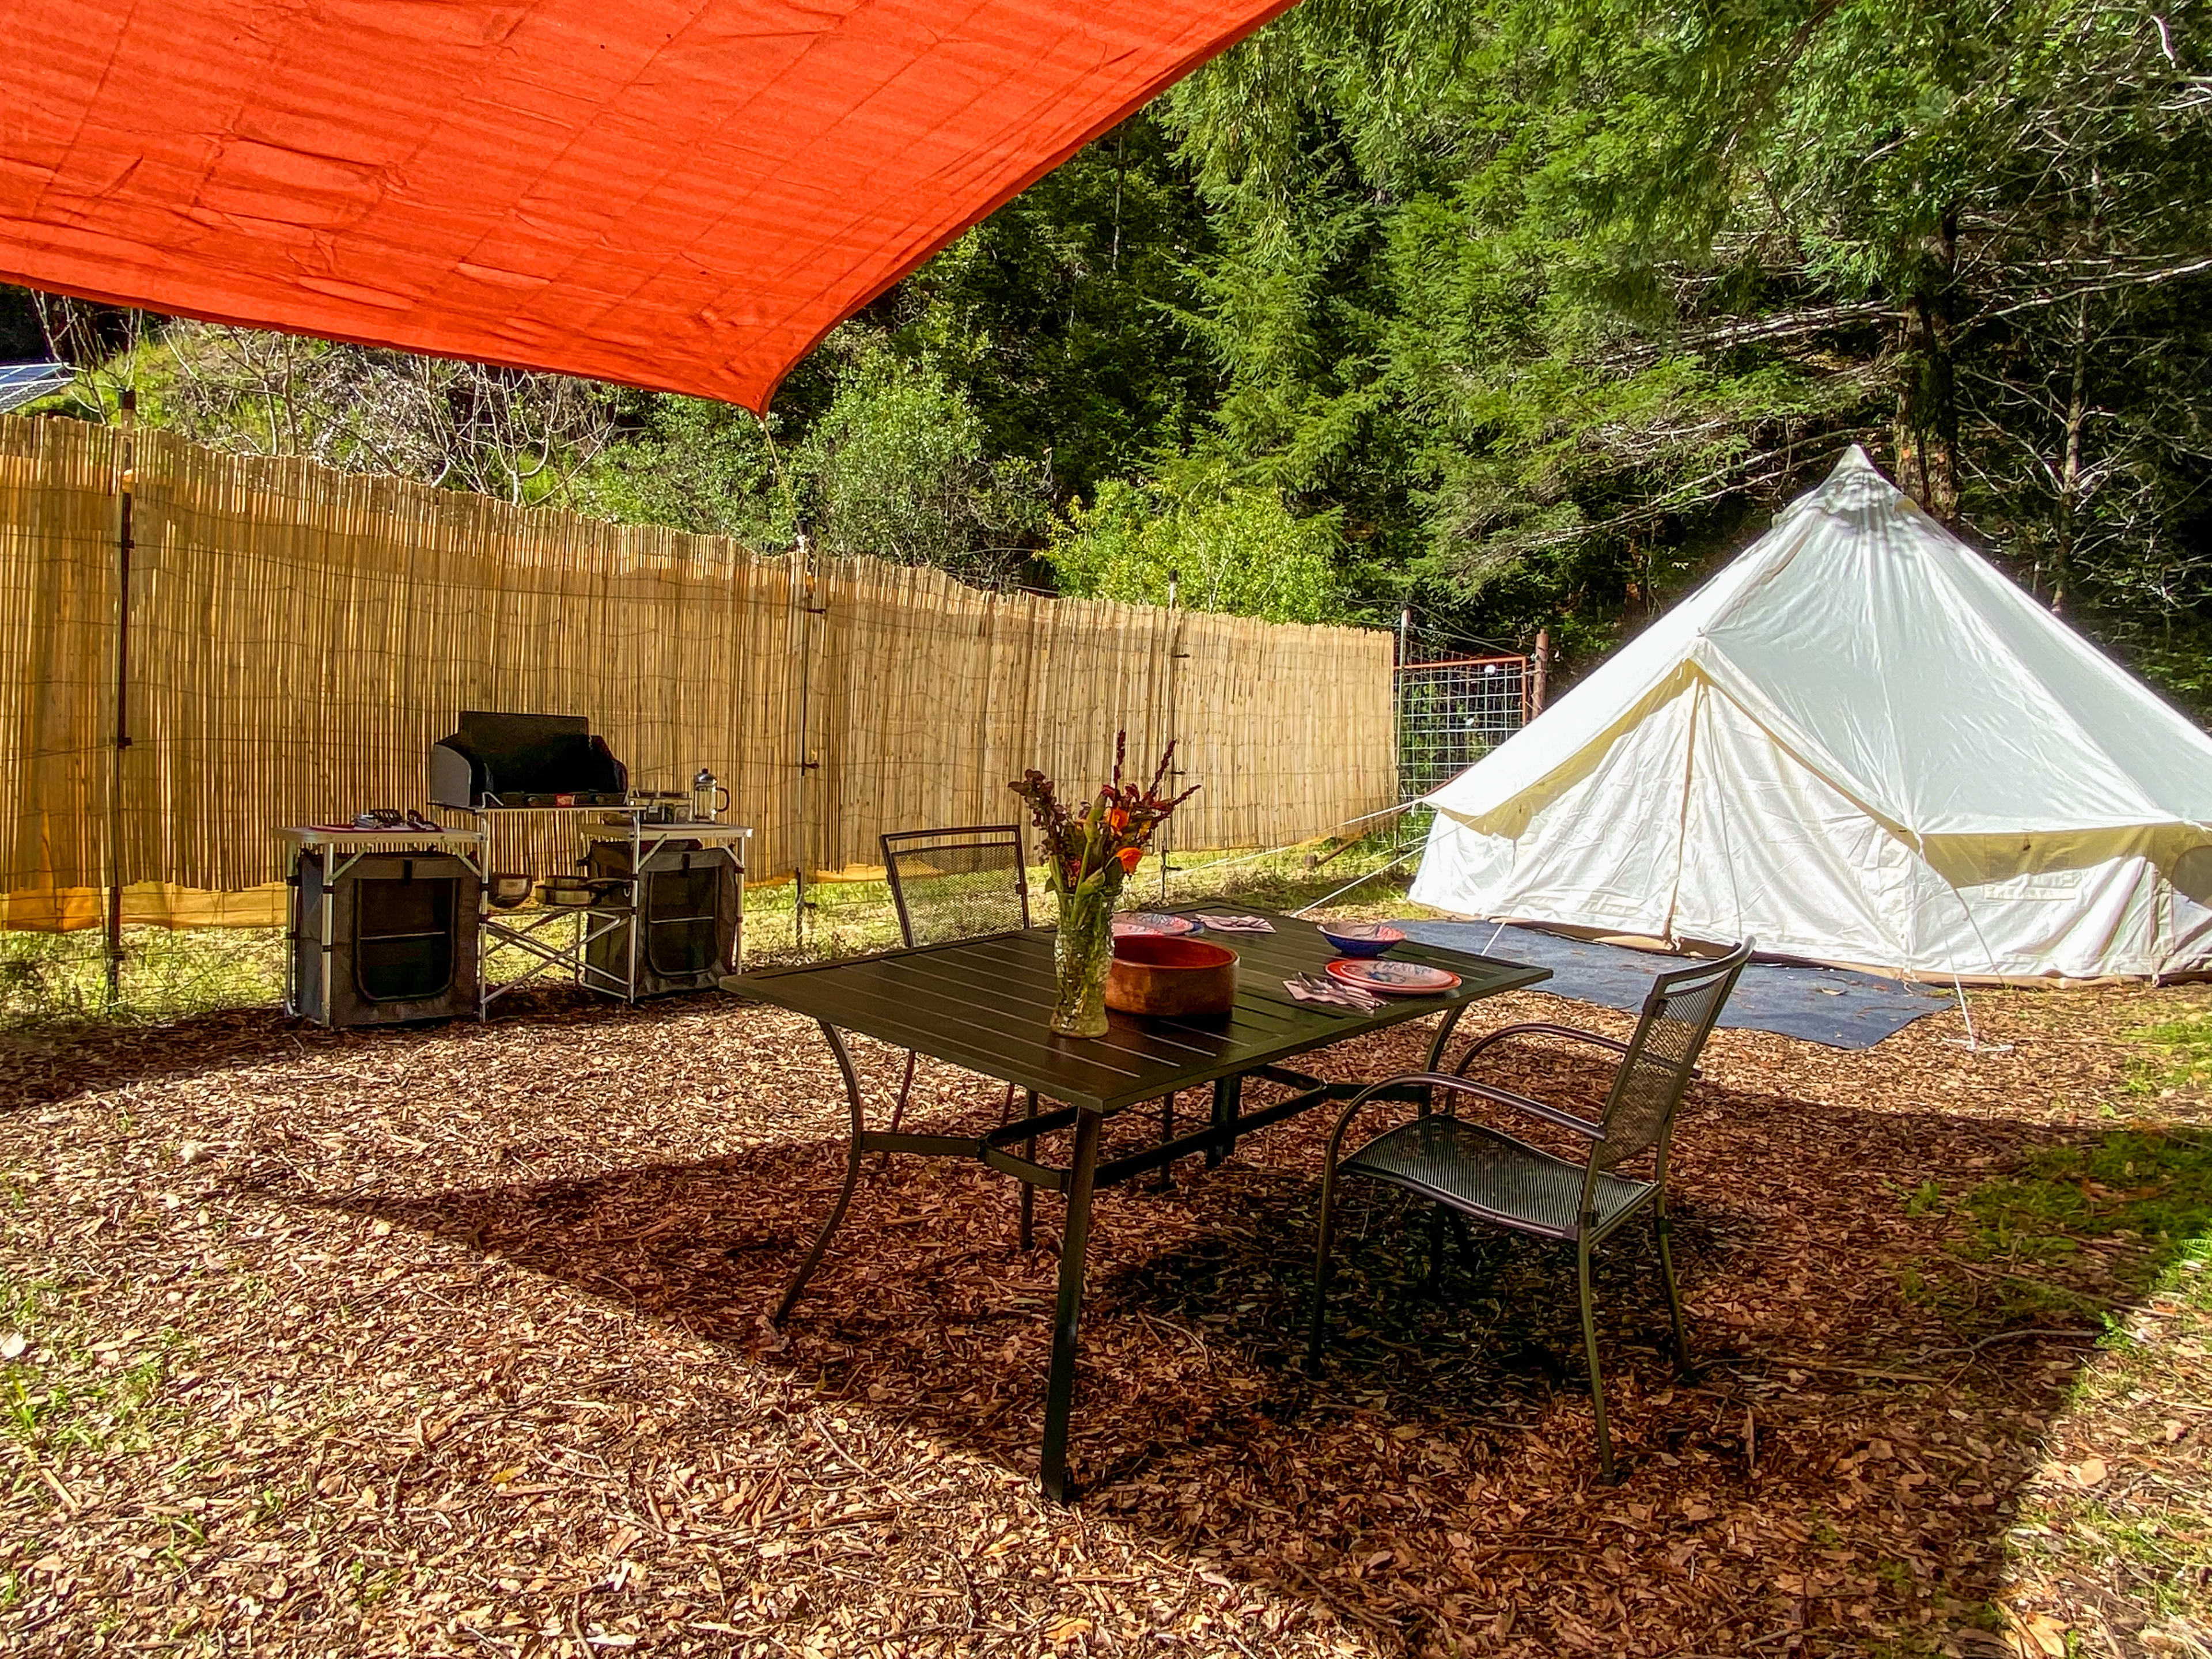 The Orchard Site has a 16ft diameter round tent, privacy fencing, an outdoor kitchenette with a 2 burner propane stove, table, and shade structure.